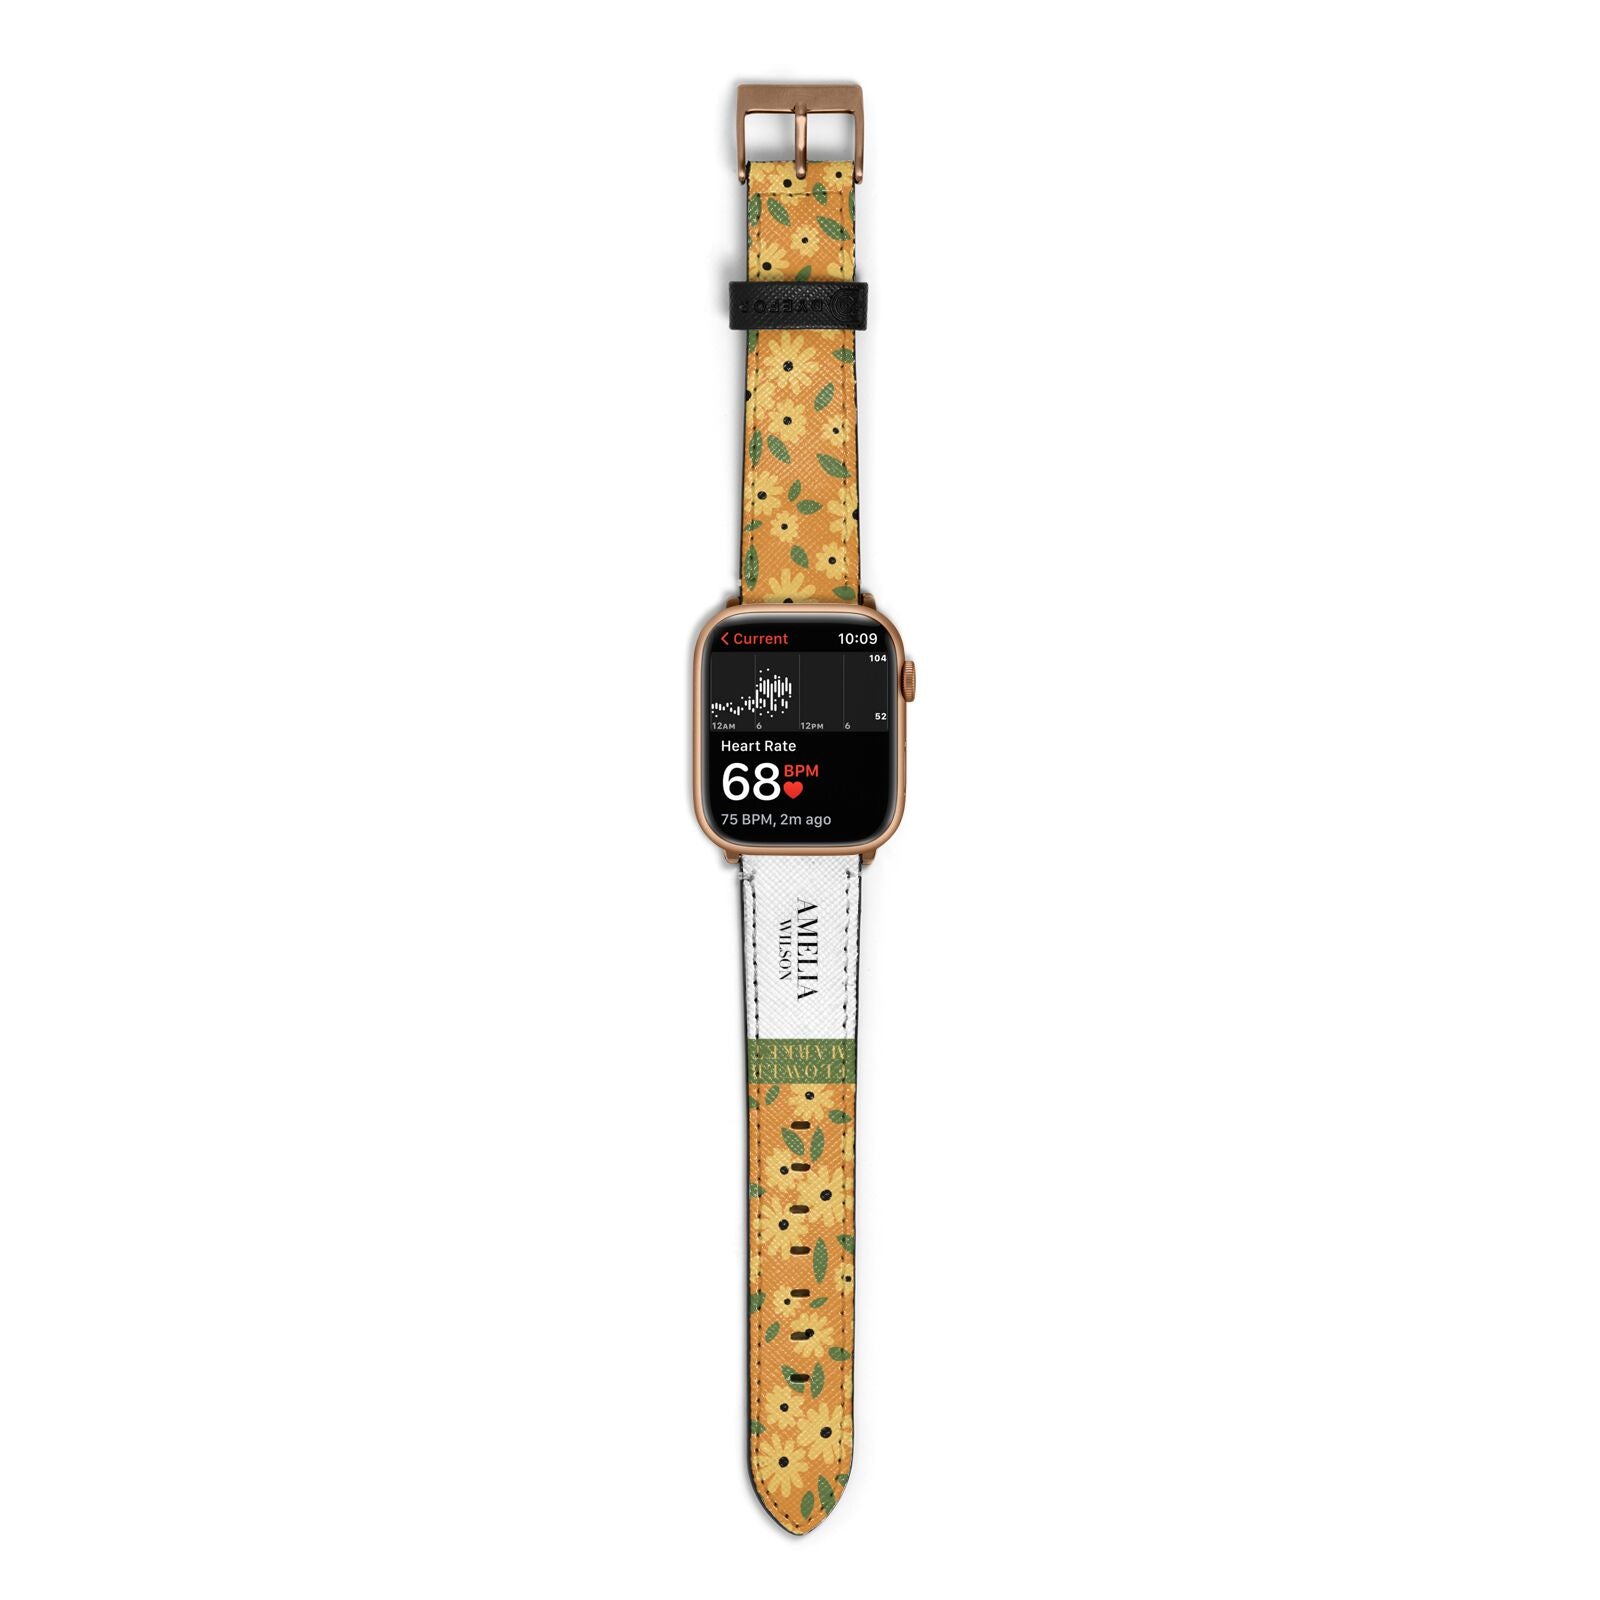 California Flower Market Apple Watch Strap Size 38mm with Gold Hardware